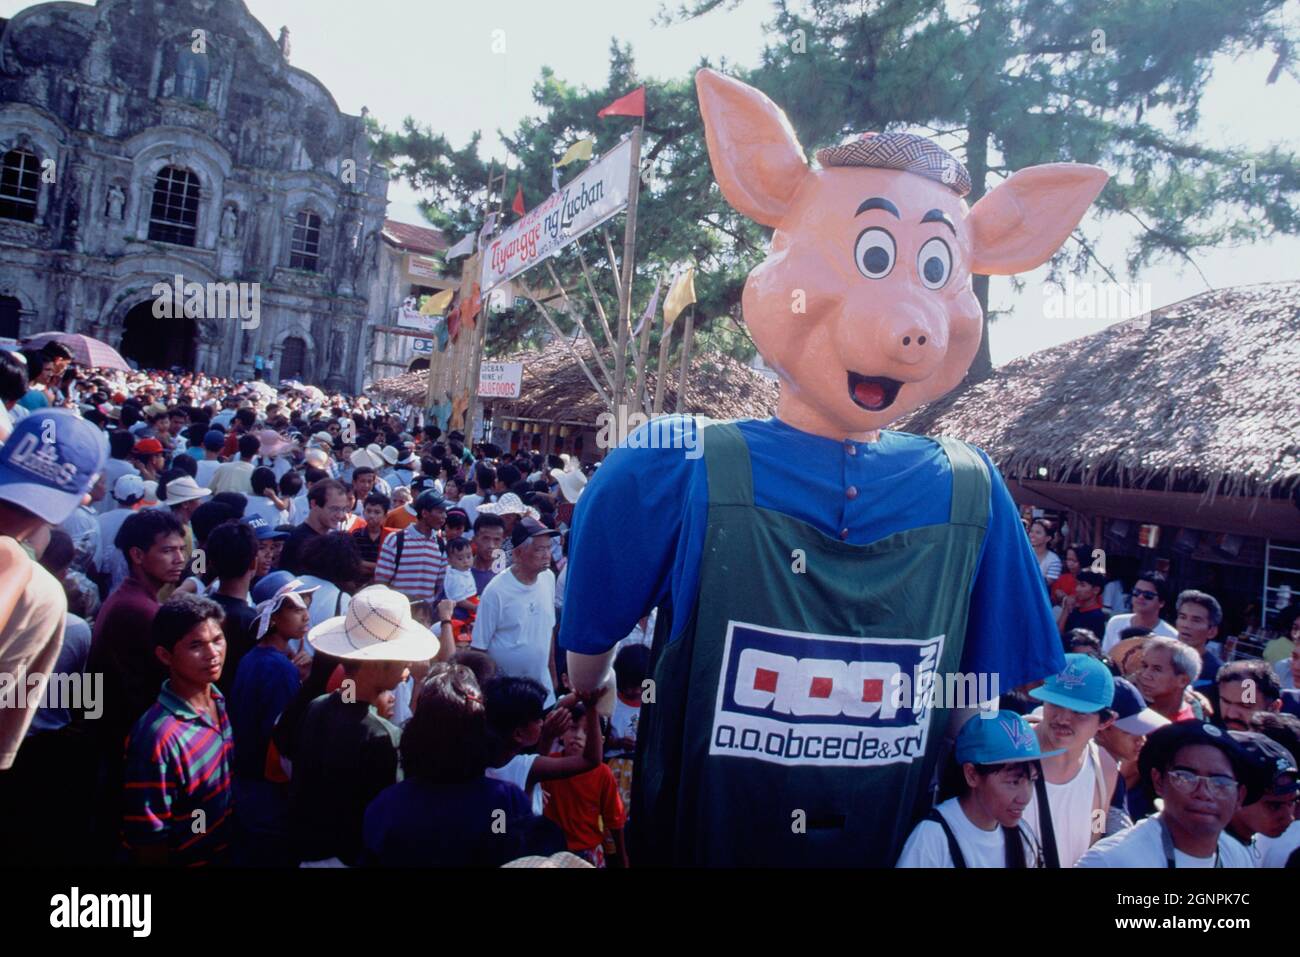 Philippines. Quezon. Pahiyas rice festival. Crowds with giant pig figure. Stock Photo